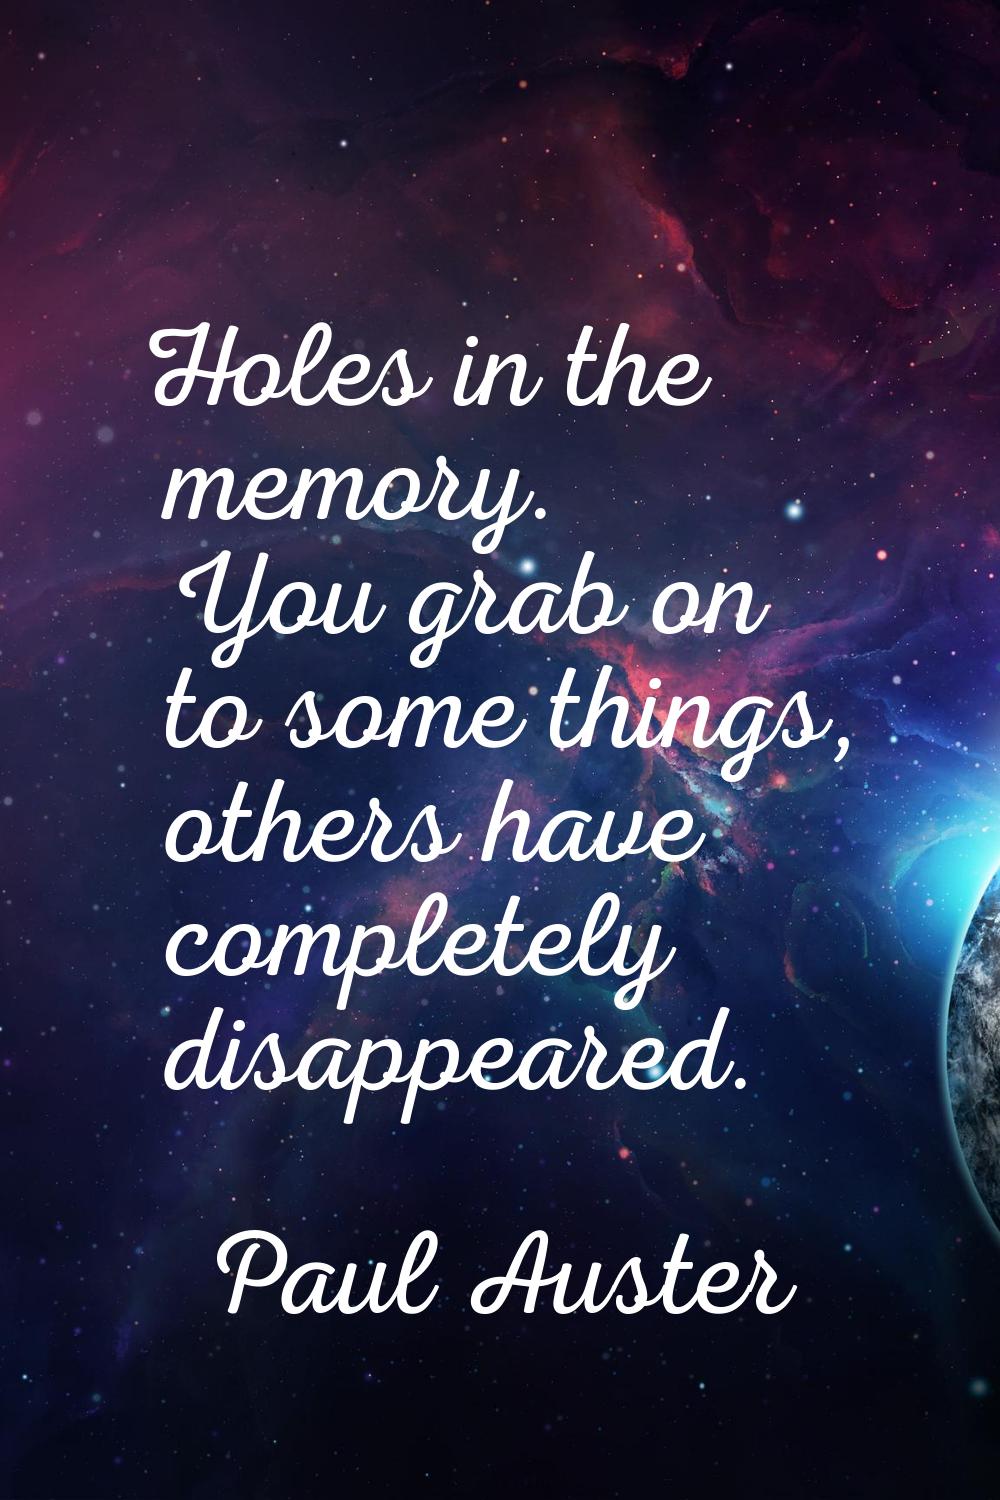 Holes in the memory. You grab on to some things, others have completely disappeared.